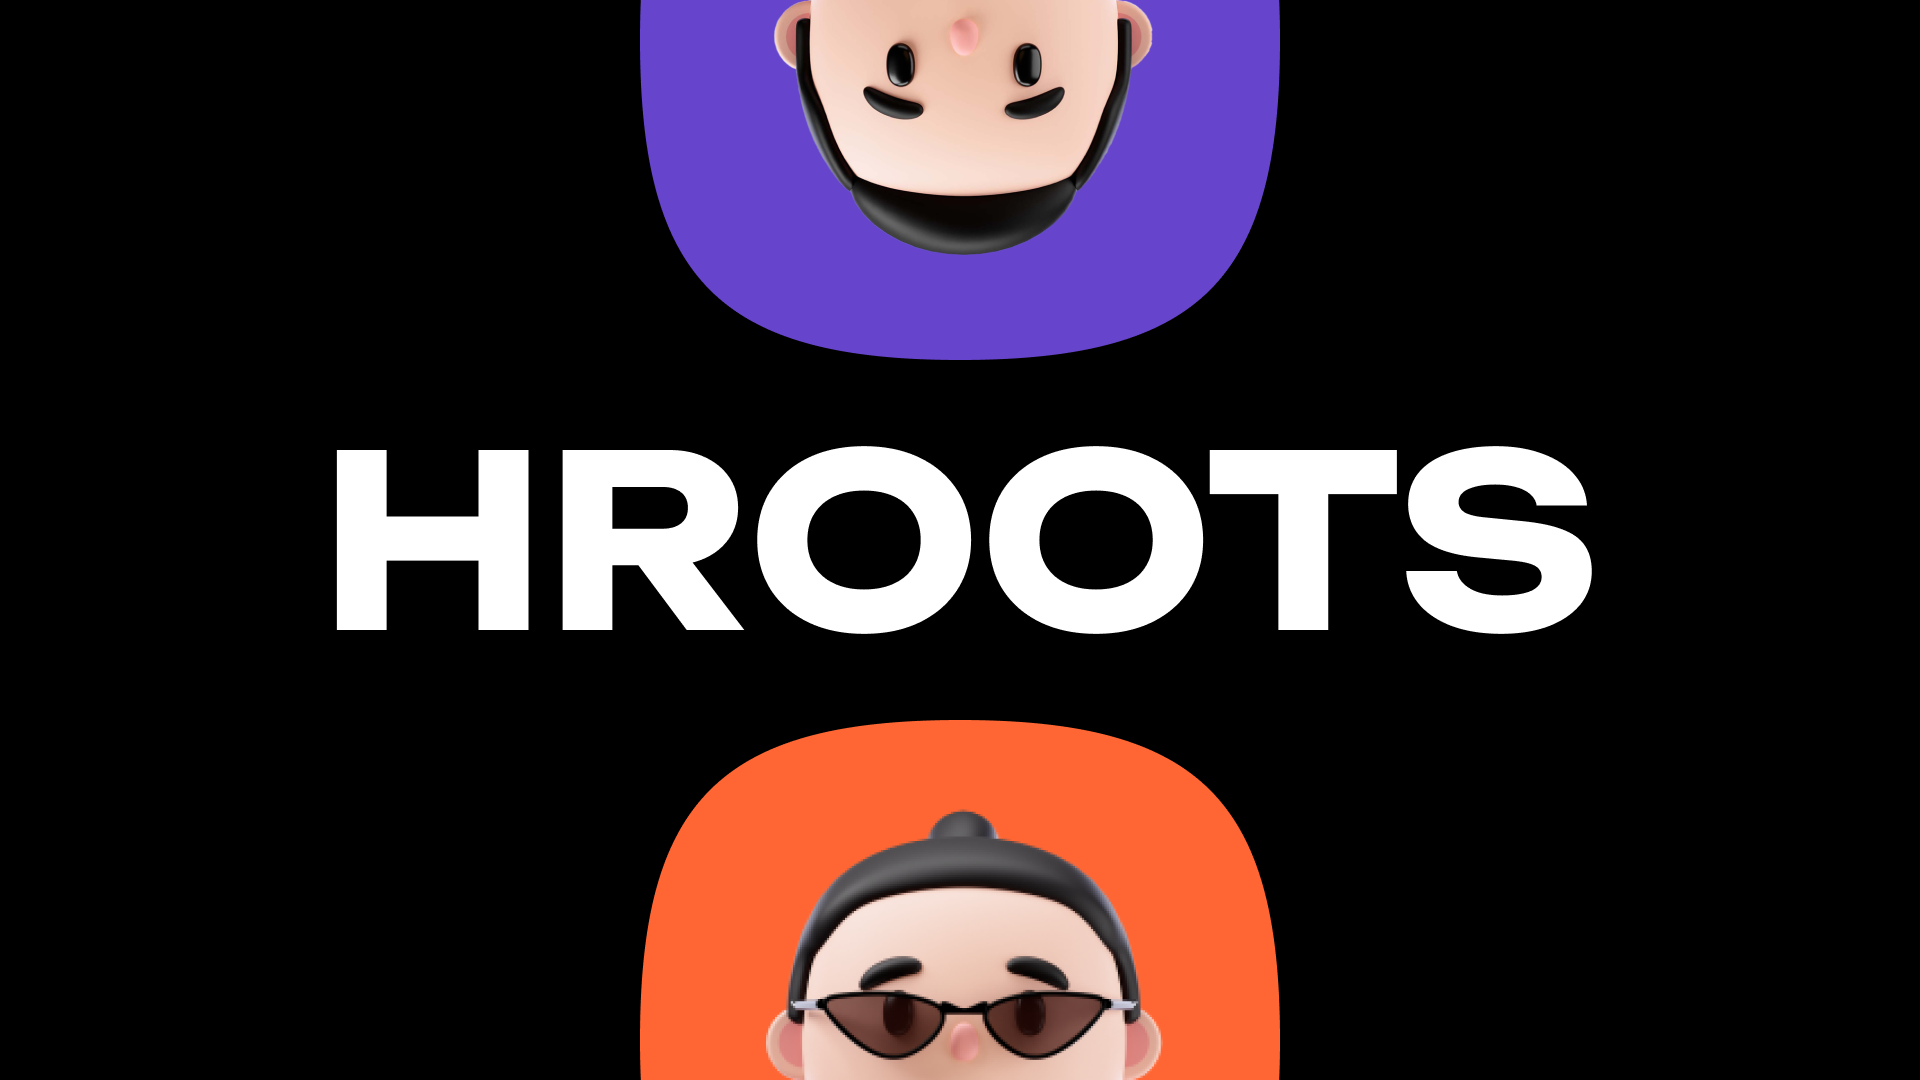 HRoots: A New Approach to HR Management through UX/UI